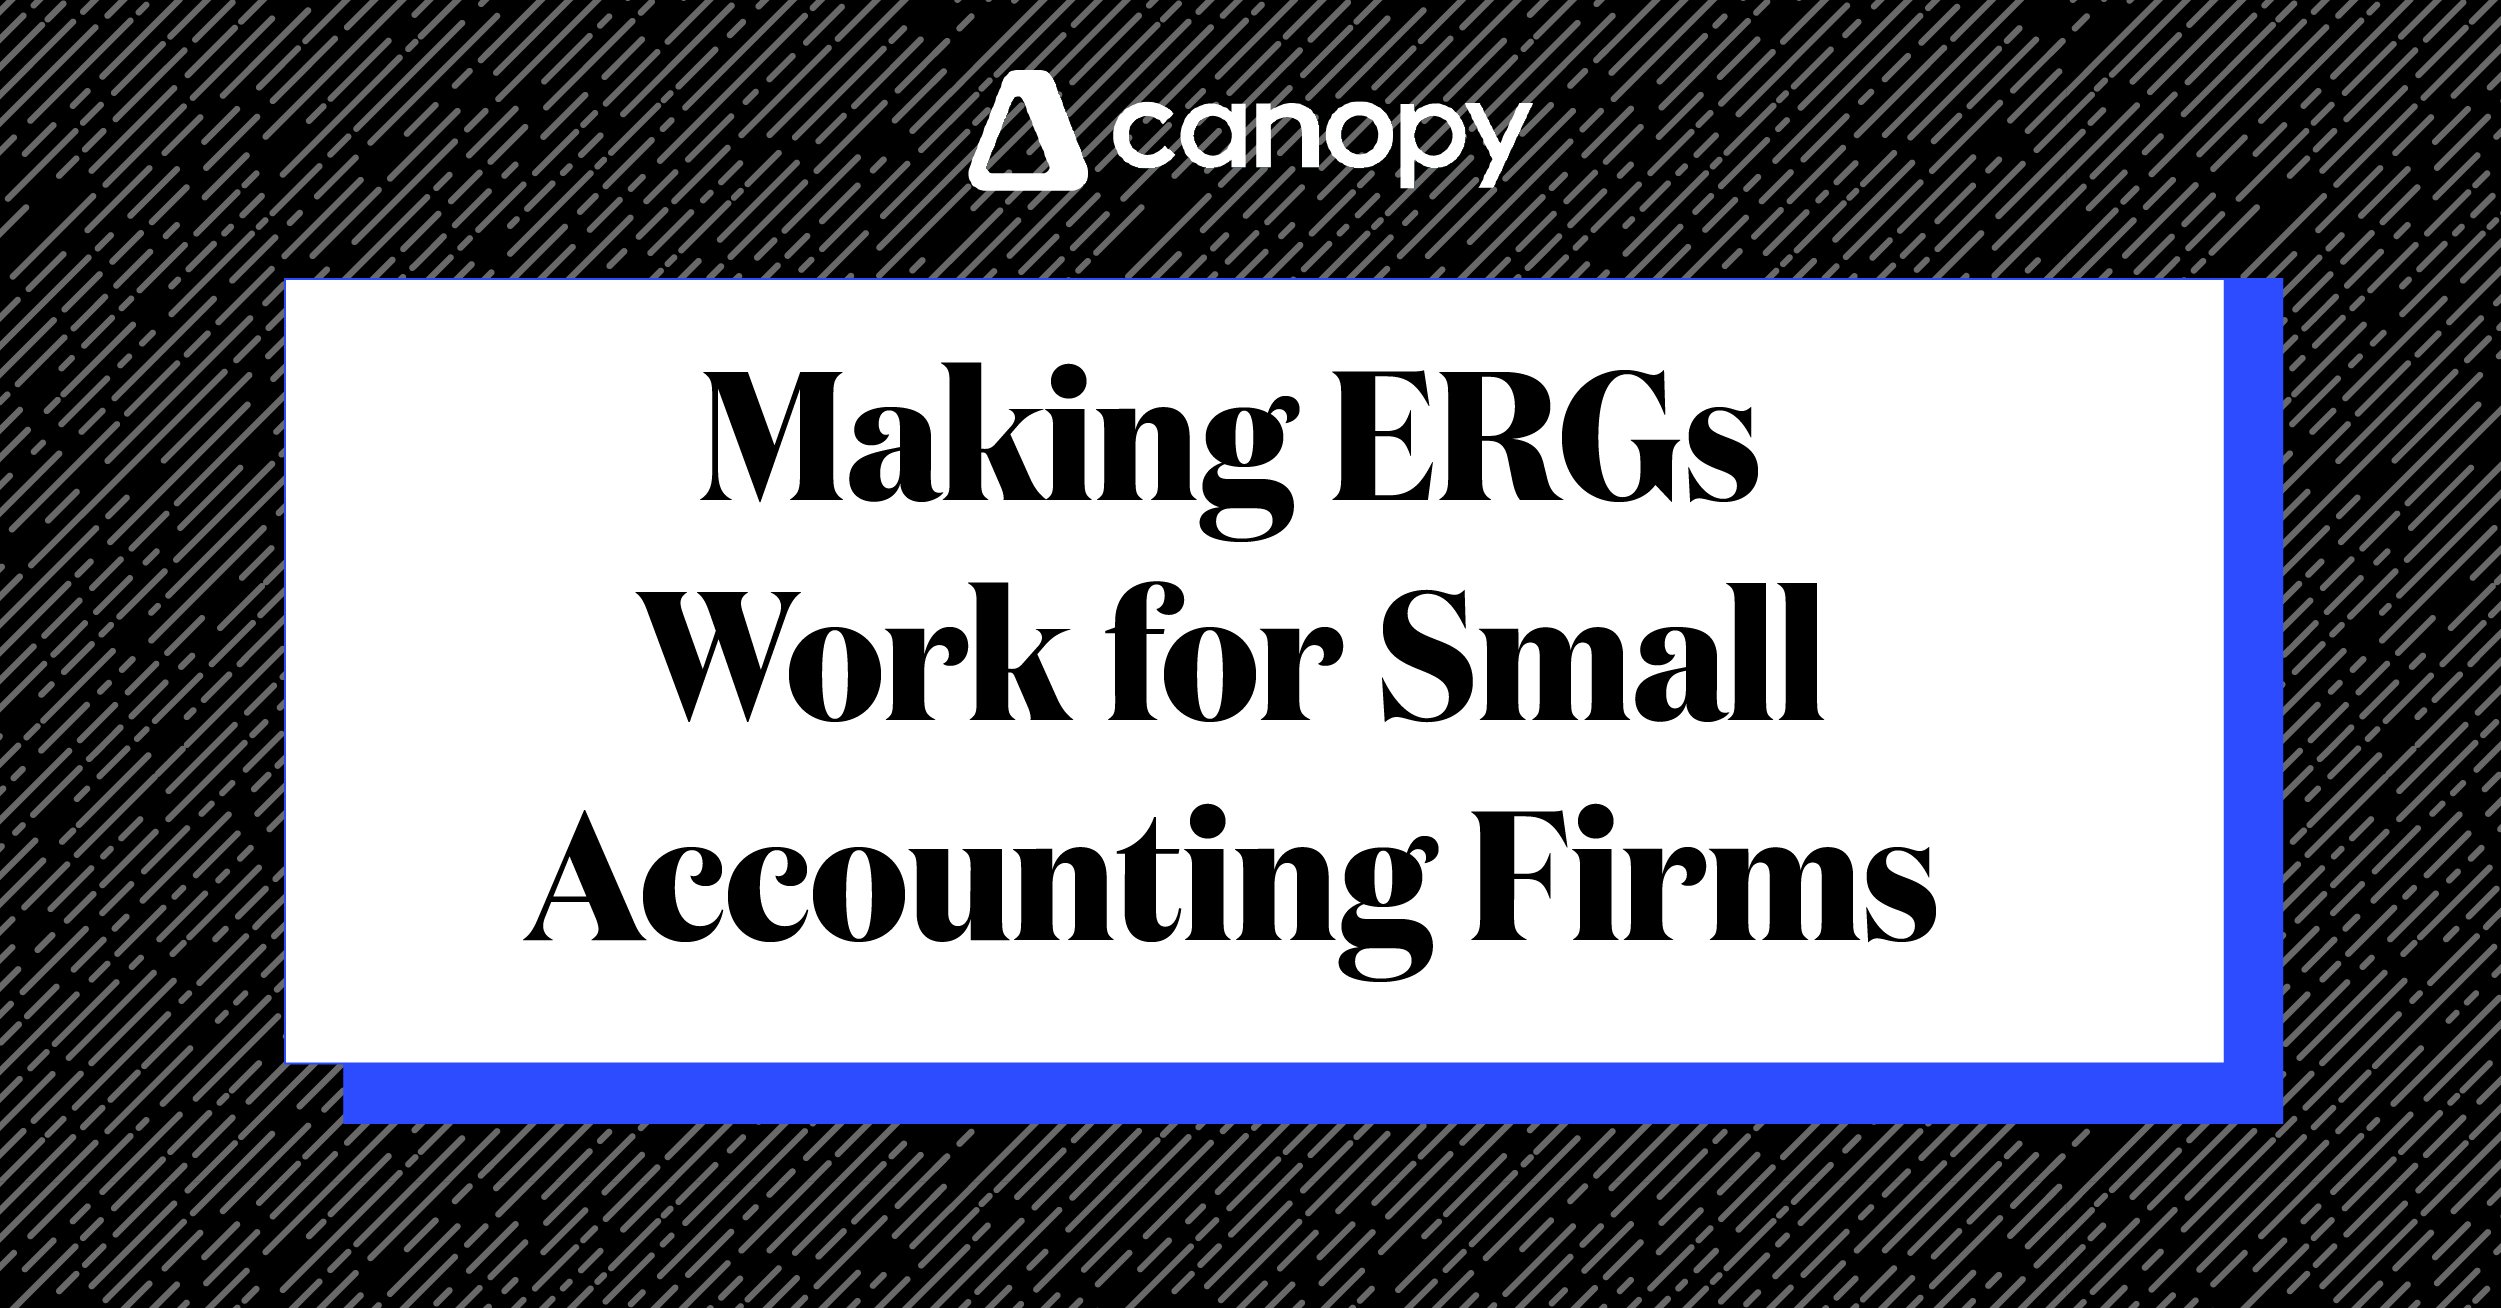 Making ERGs Work for Small Accounting Firms